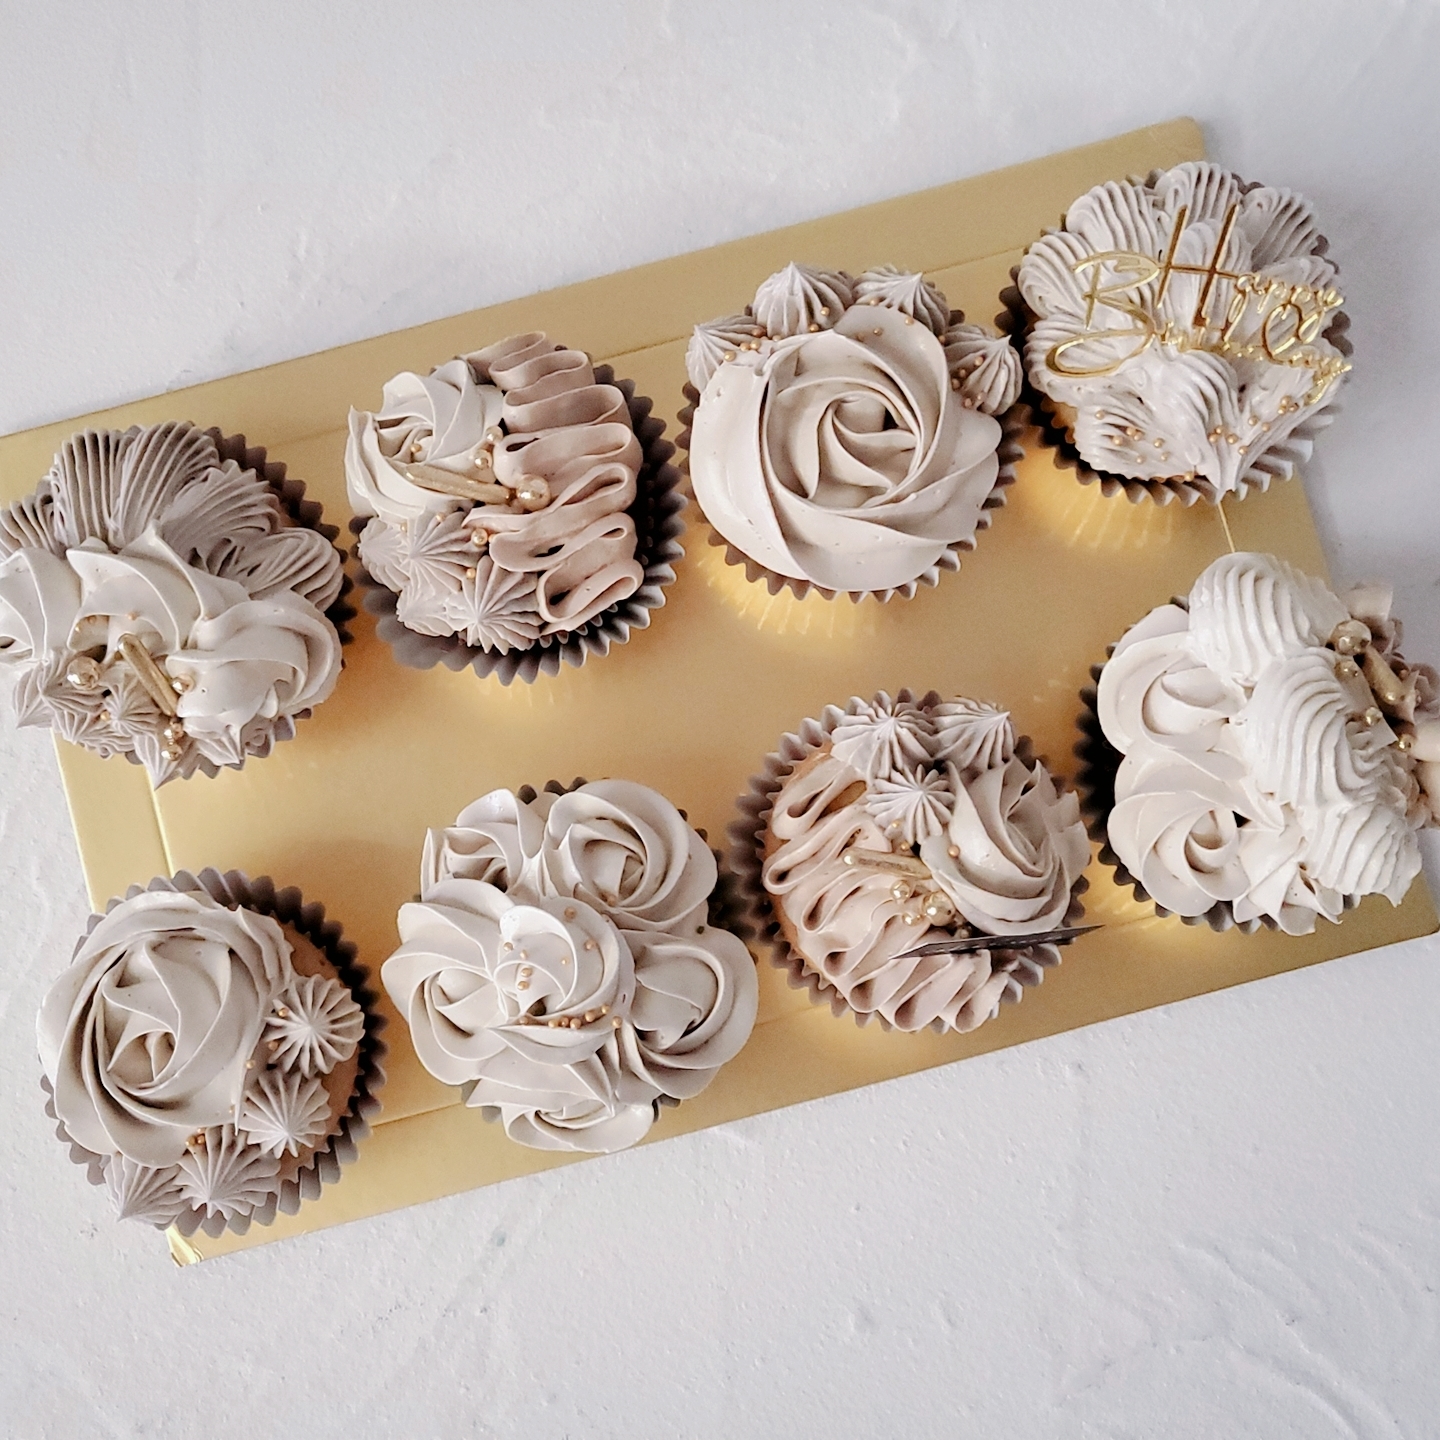 Nude Toned Cupcakes With Gold Detailing 